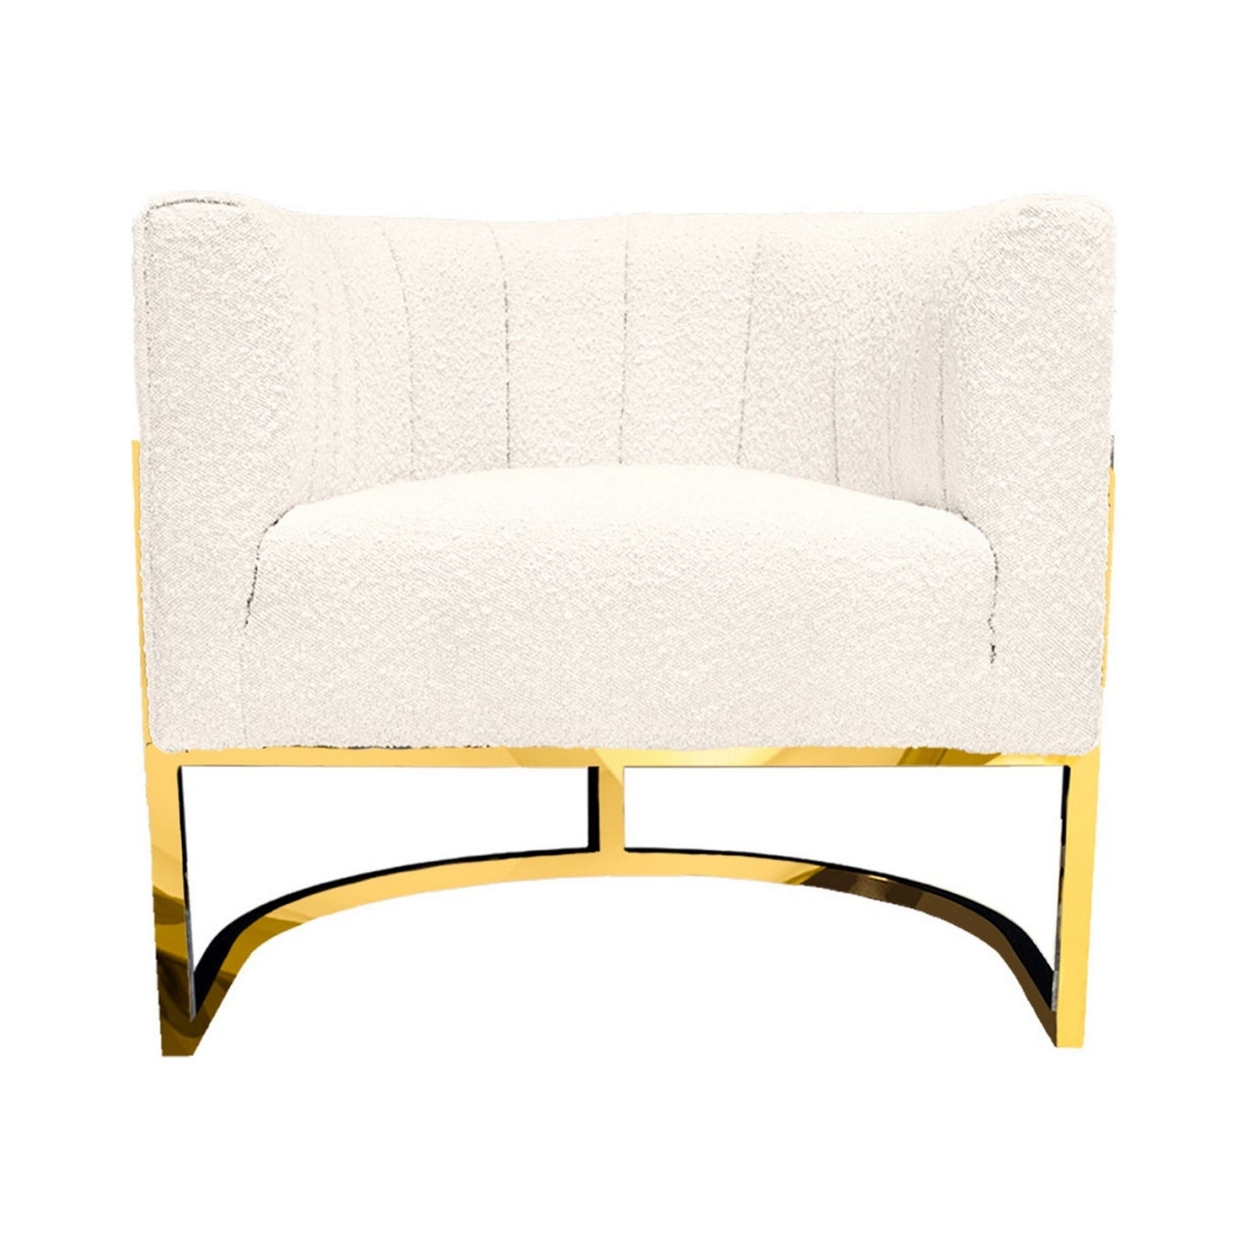 Xin 30 Inch Cantilever Accent Chair, Padded, White Boucle Upholstery, Gold- Saltoro Sherpi